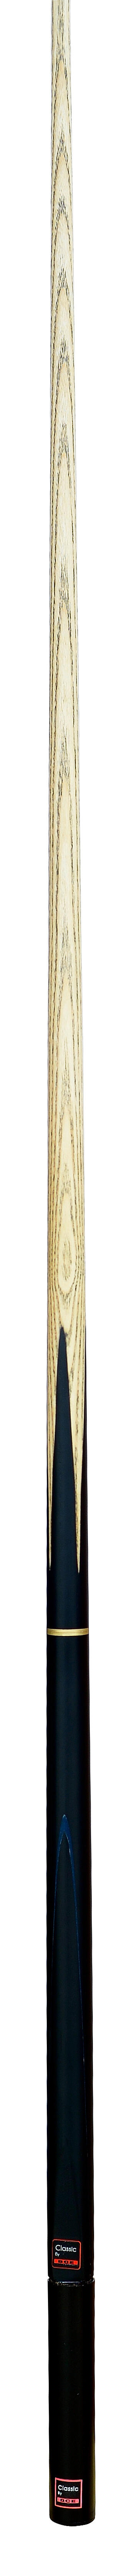 CLASSIC BY BCE 3 PIECE ASH CUE Classic by BCE 3 Piece Ash Cue with Extension 6/6